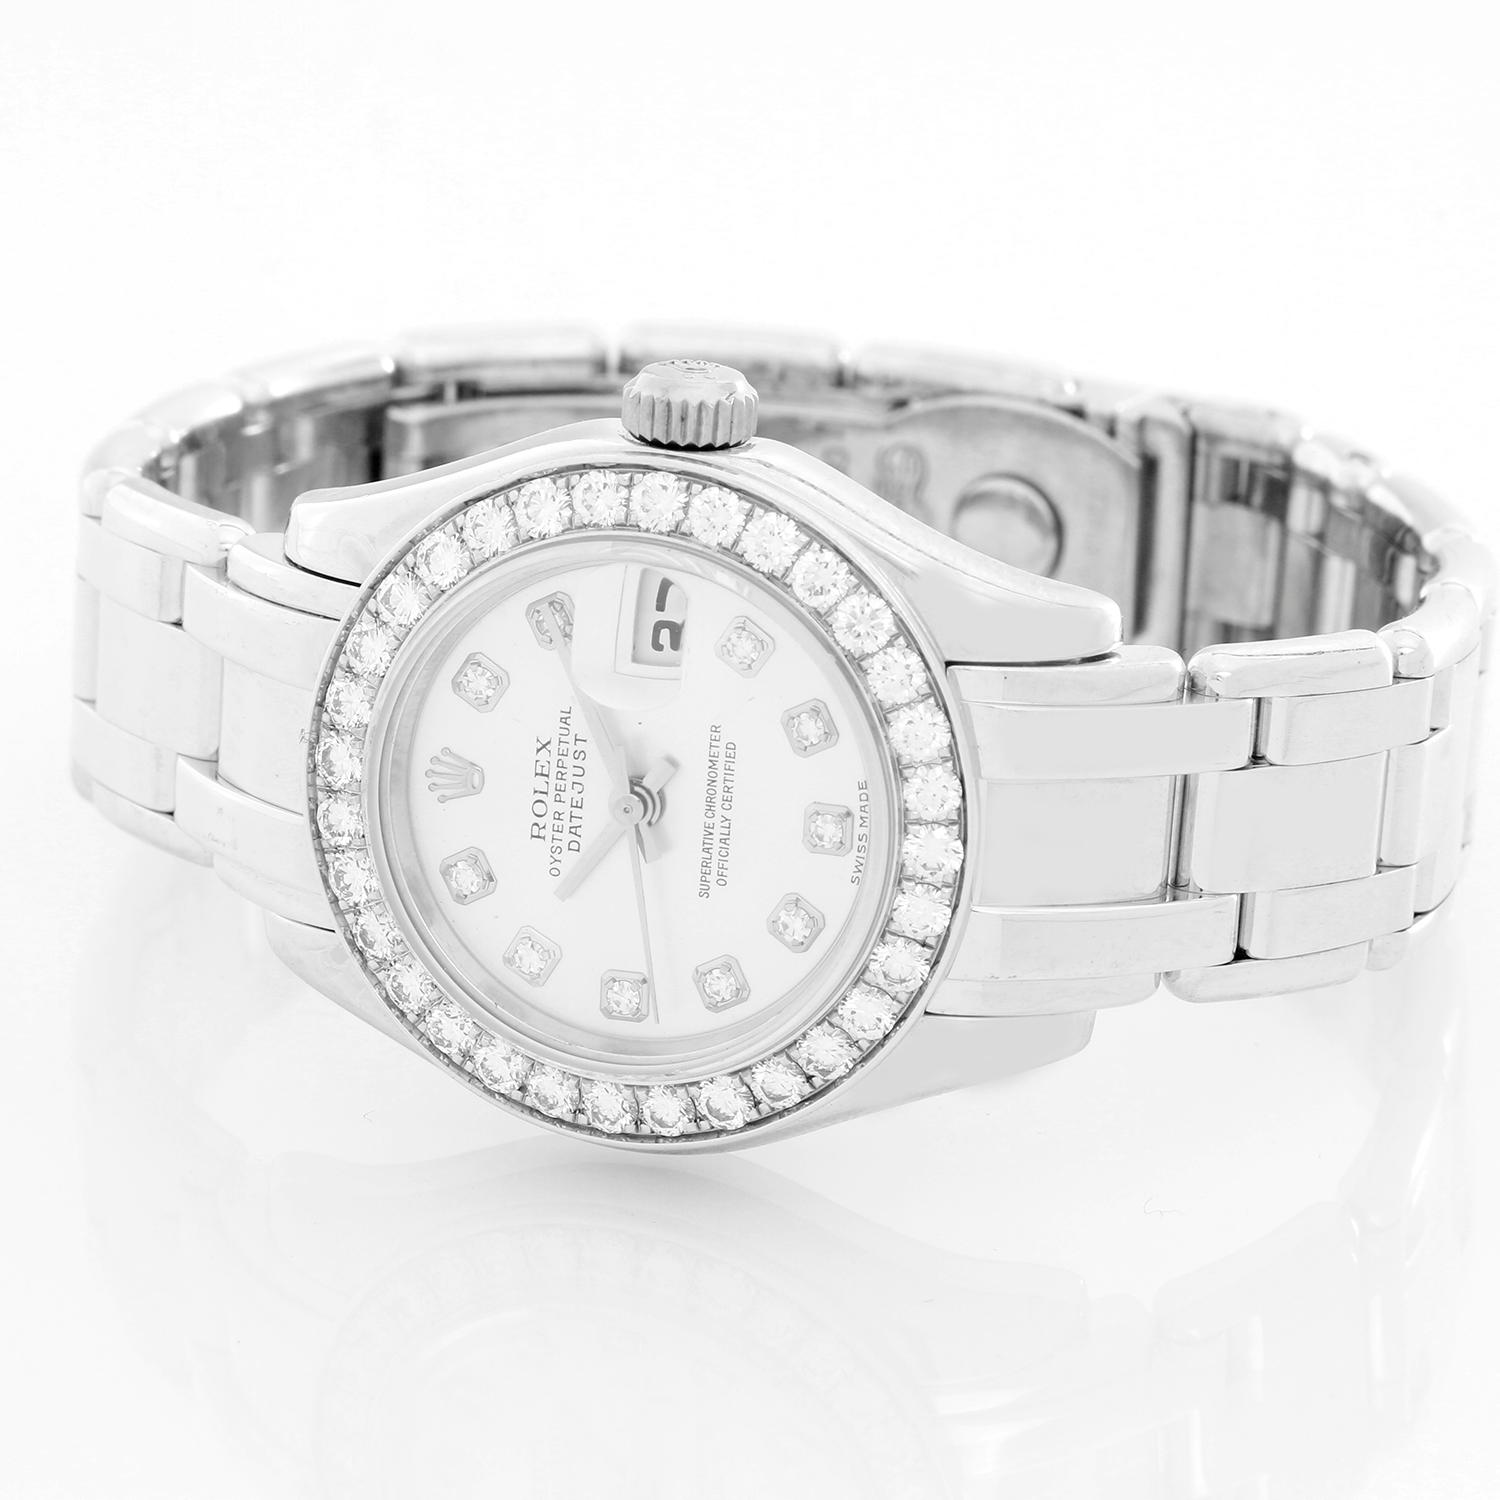 Rolex Ladies Pearlmaster 18k White Gold Watch 80299 - Automatic winding, 31 jewels, Quickset, sapphire crystal. 18k white gold case with factory 32-diamond bezel (29mm diameter). Silver dial with Rolex diamond hour markers. 18k white gold